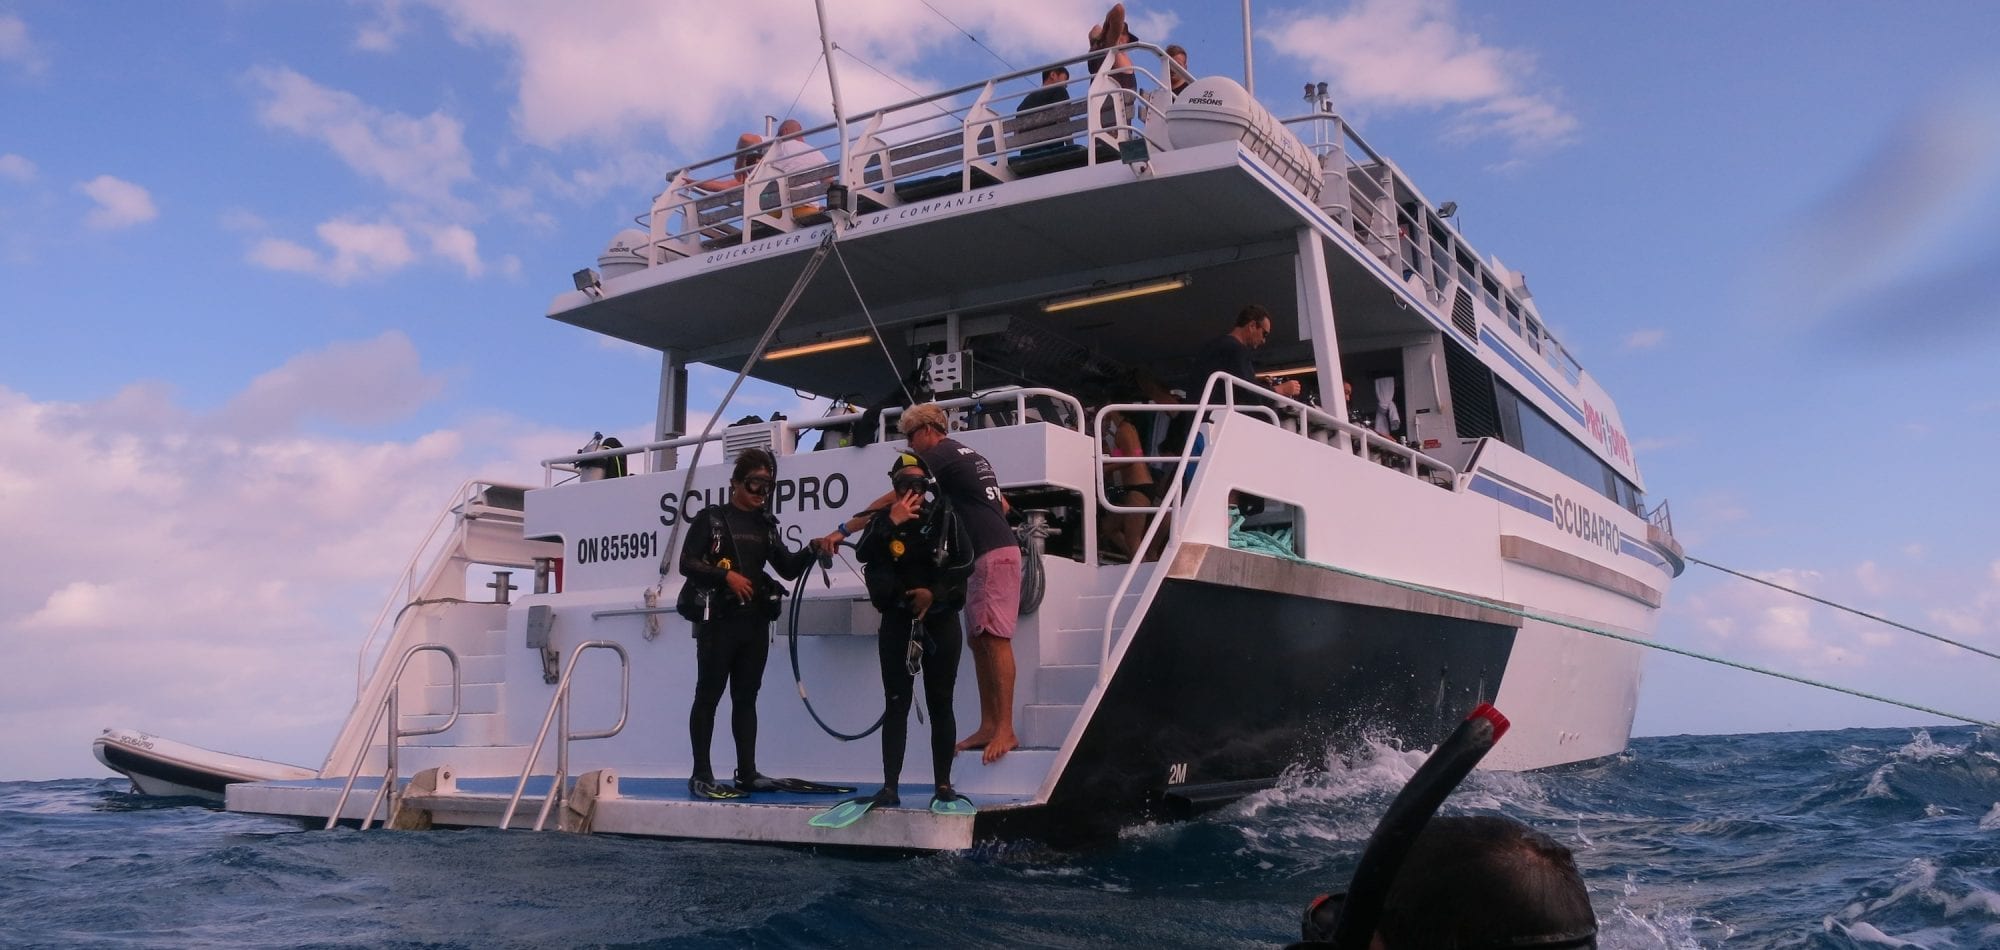 Cairns liveaboard scuba diving - scuba divers prepare to enter the water off the back of the Scubapro boat on the Great Barrier Reef, Queenland